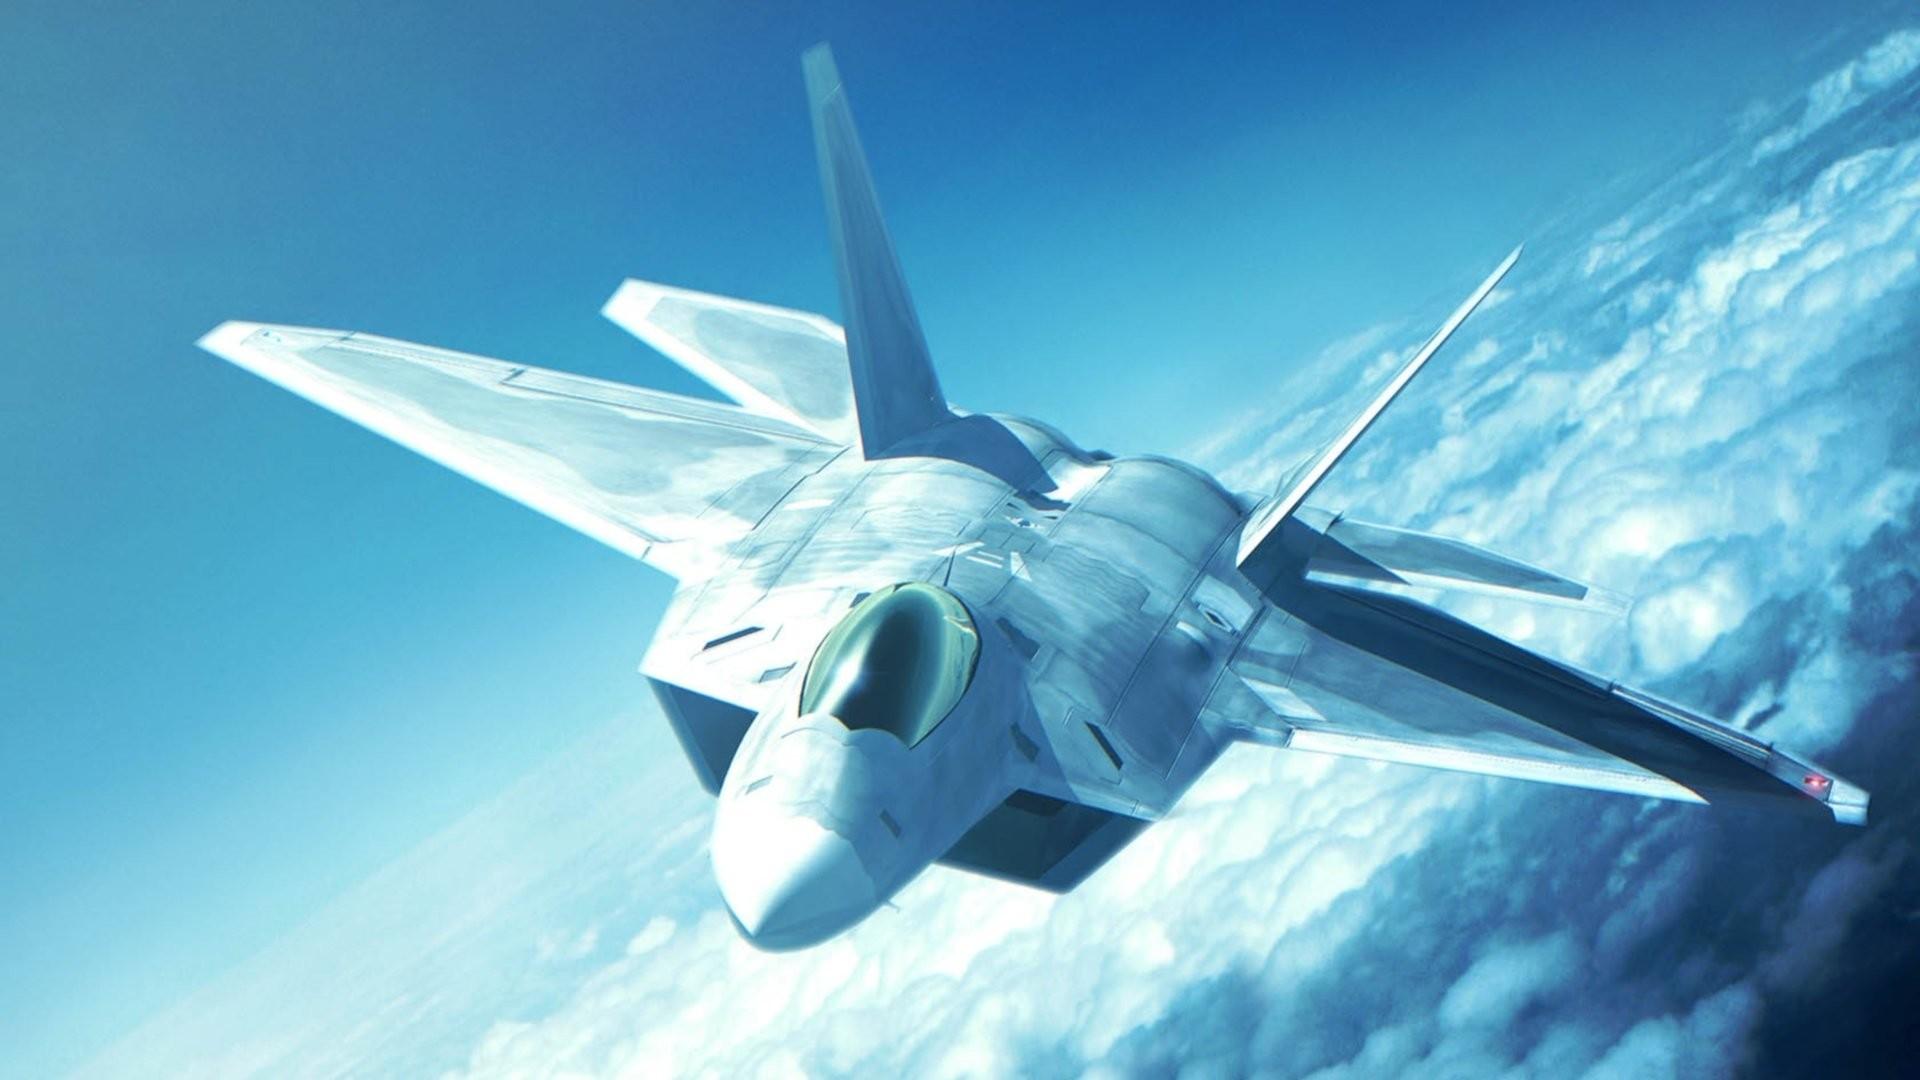 Ace Combat Wallpaper background picture